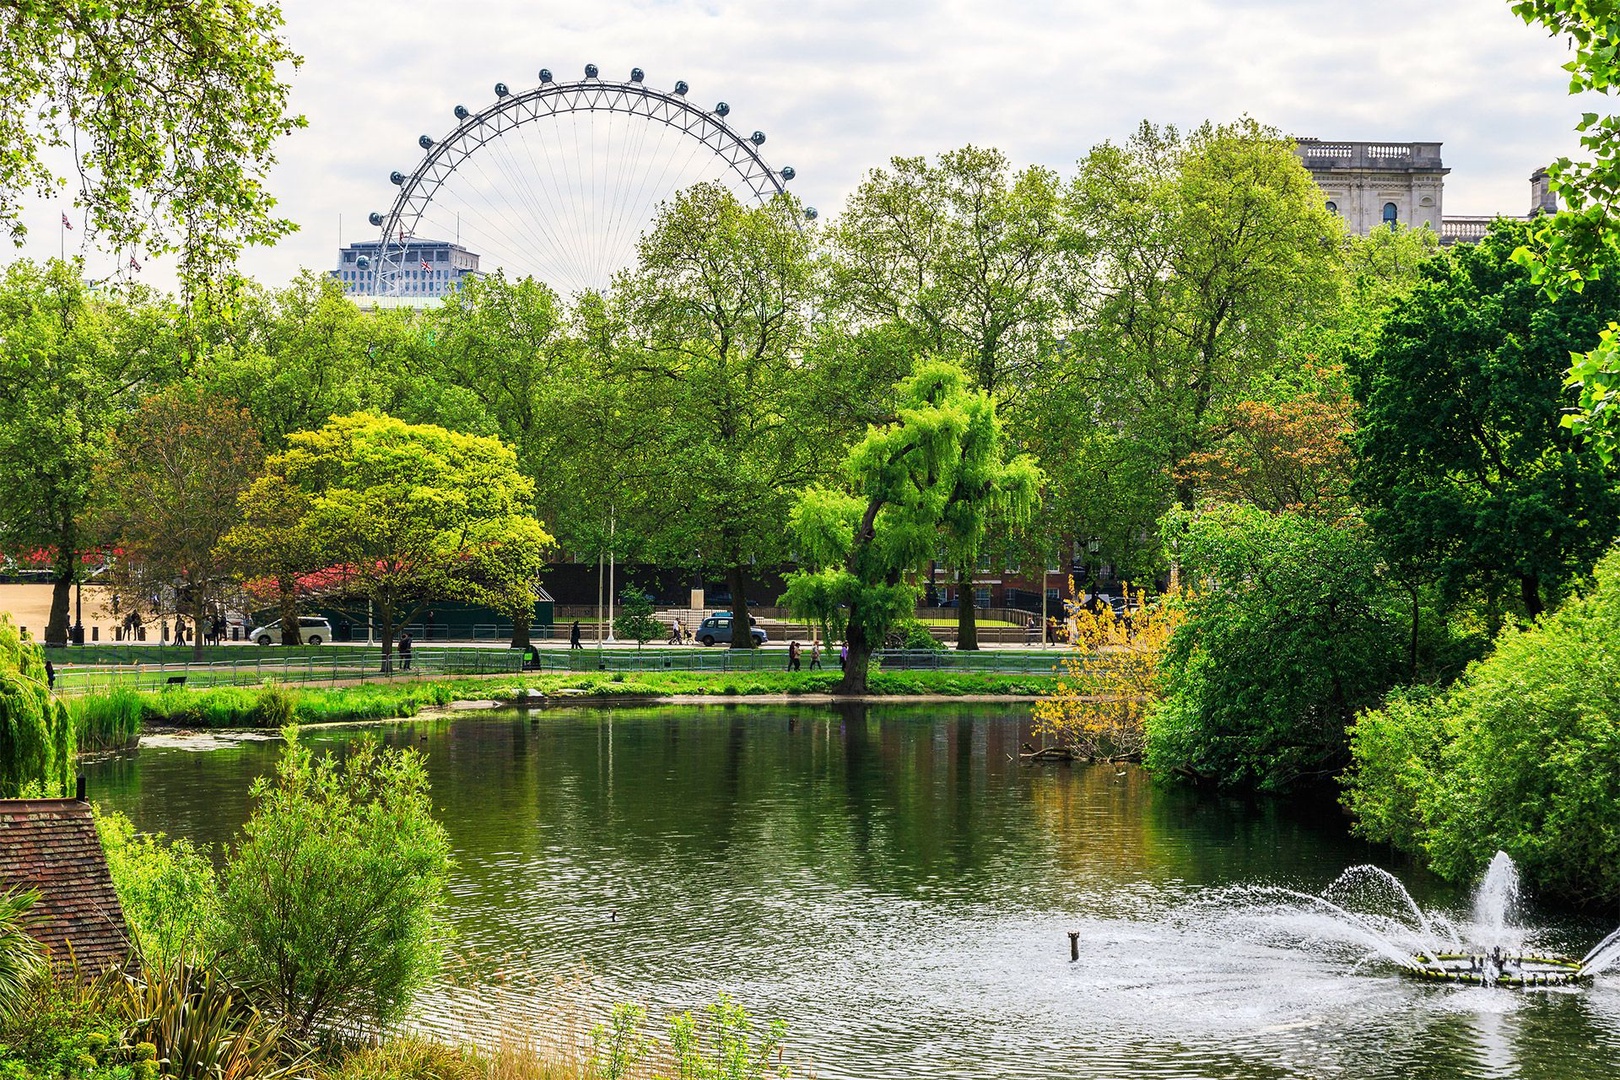 Visit London's fantastic parks and gardens during your stay!